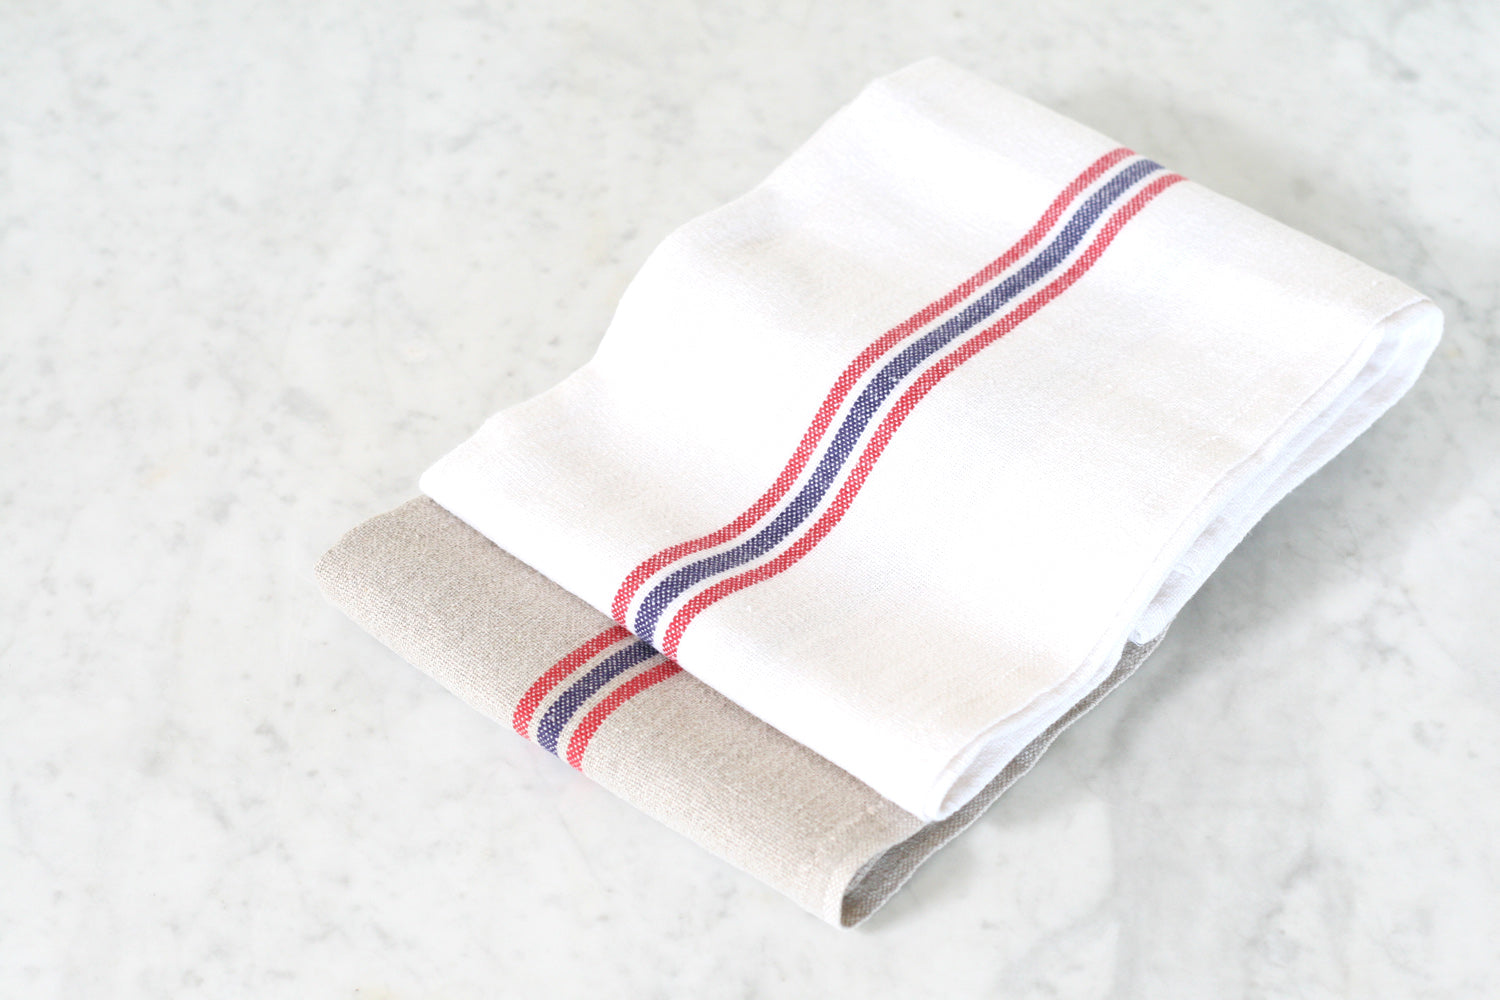 French Country Stripe Linen Dish Towel Set of 3